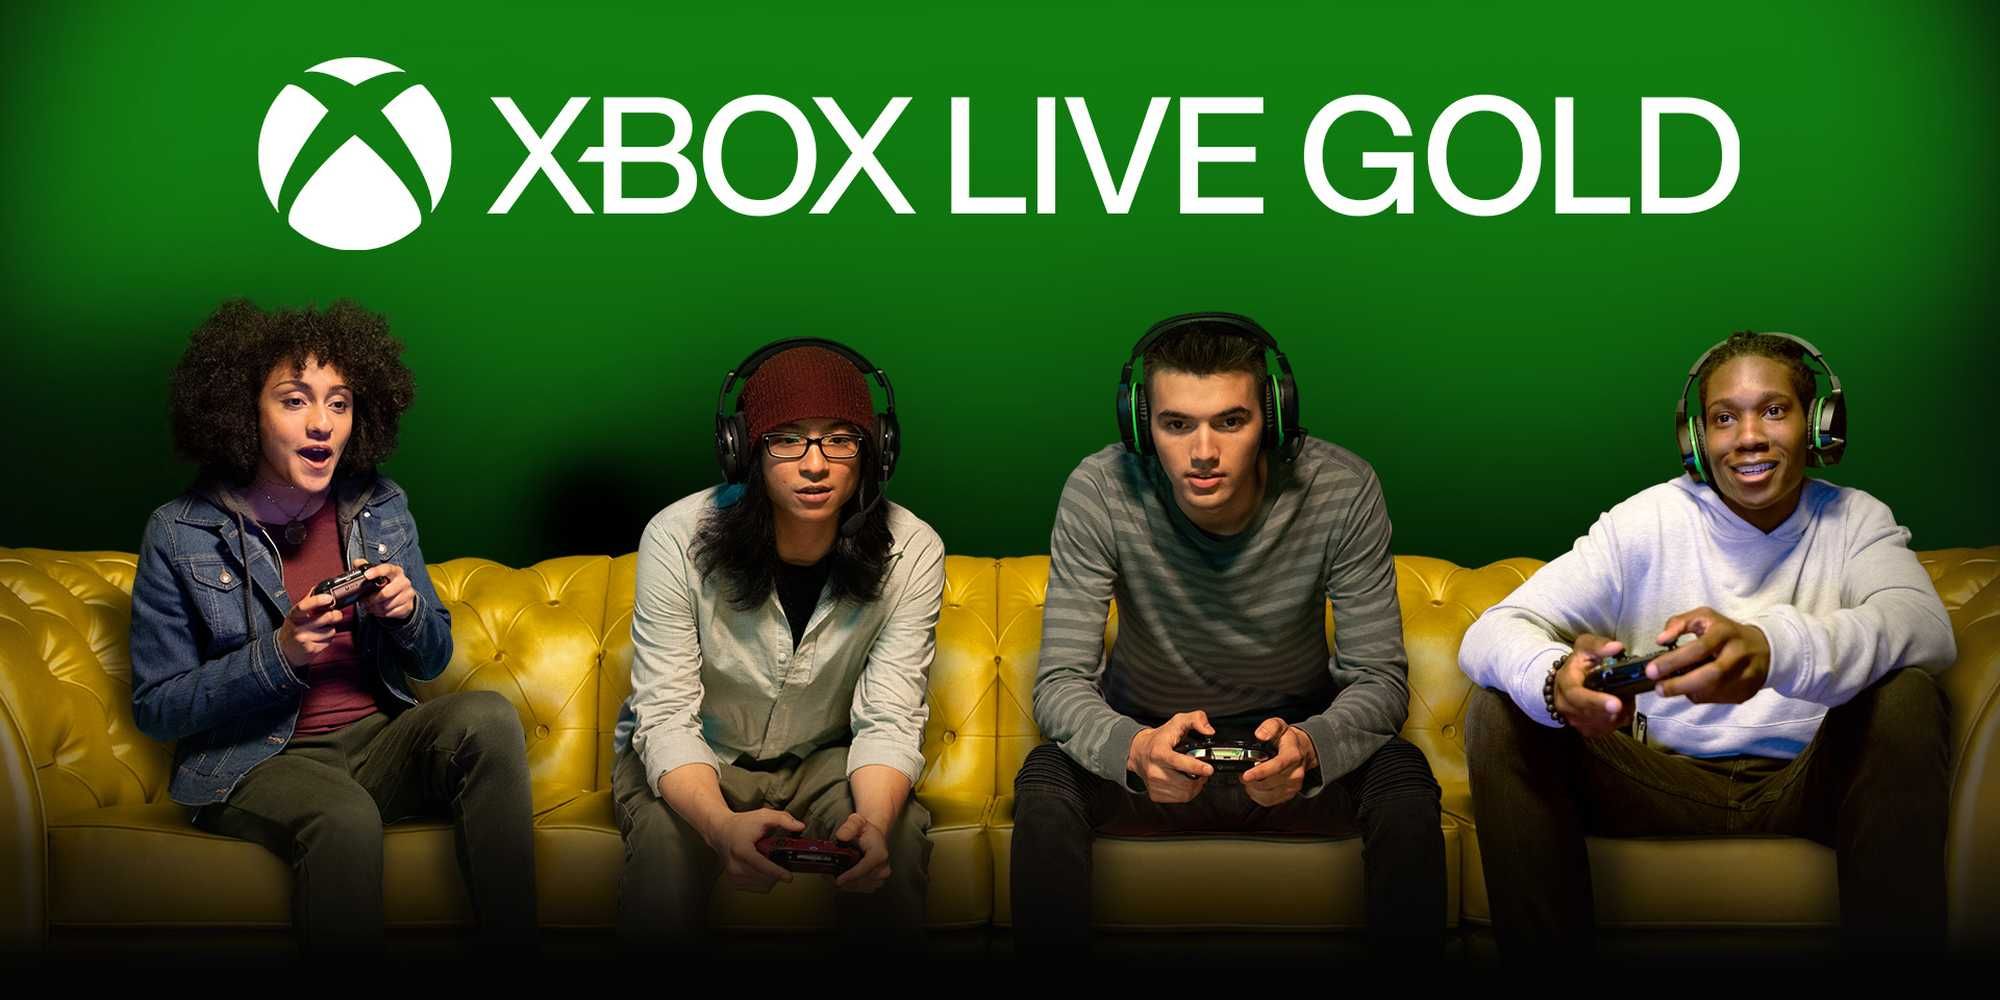 heks Stap genie How To Subscribe To Xbox Live Gold